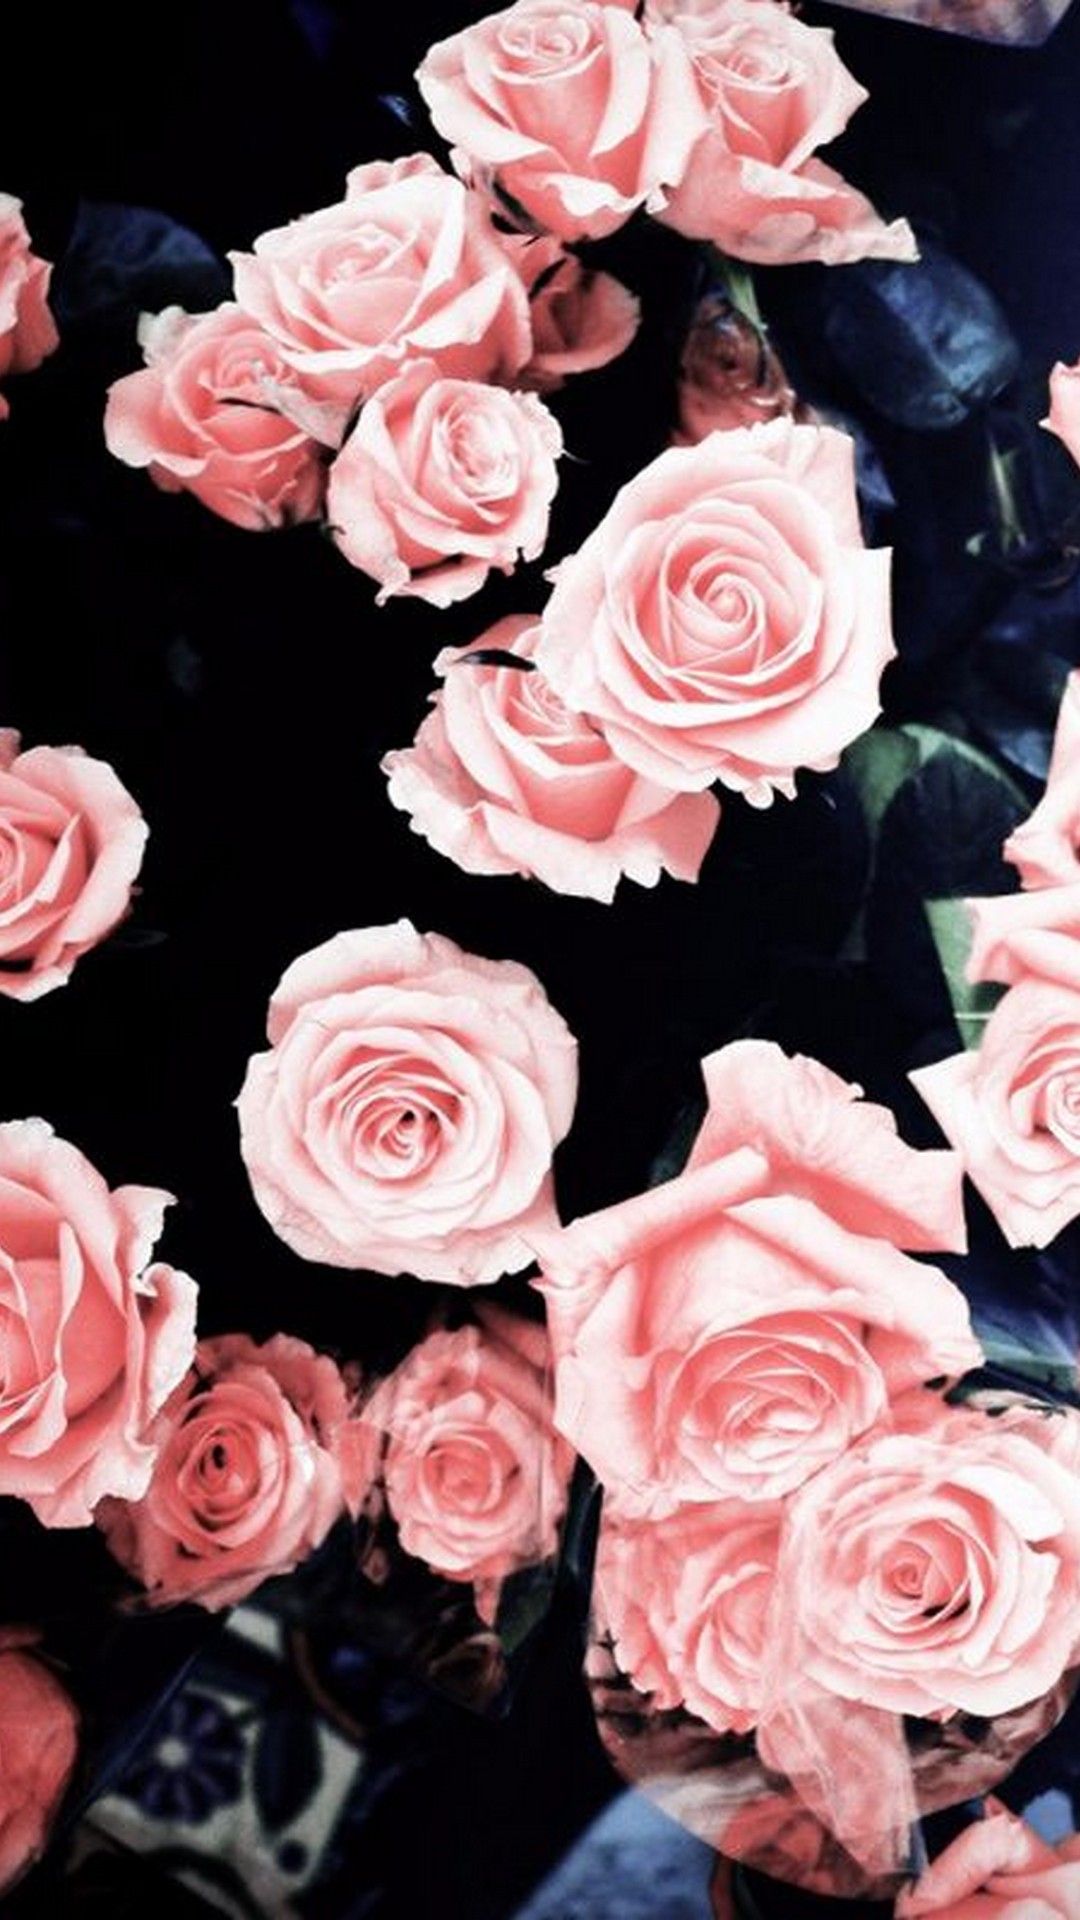 Pink Rose Girly Wallpaper For Mobile. Best HD Wallpaper. Flower wallpaper, iPhone wallpaper girly, Flowers